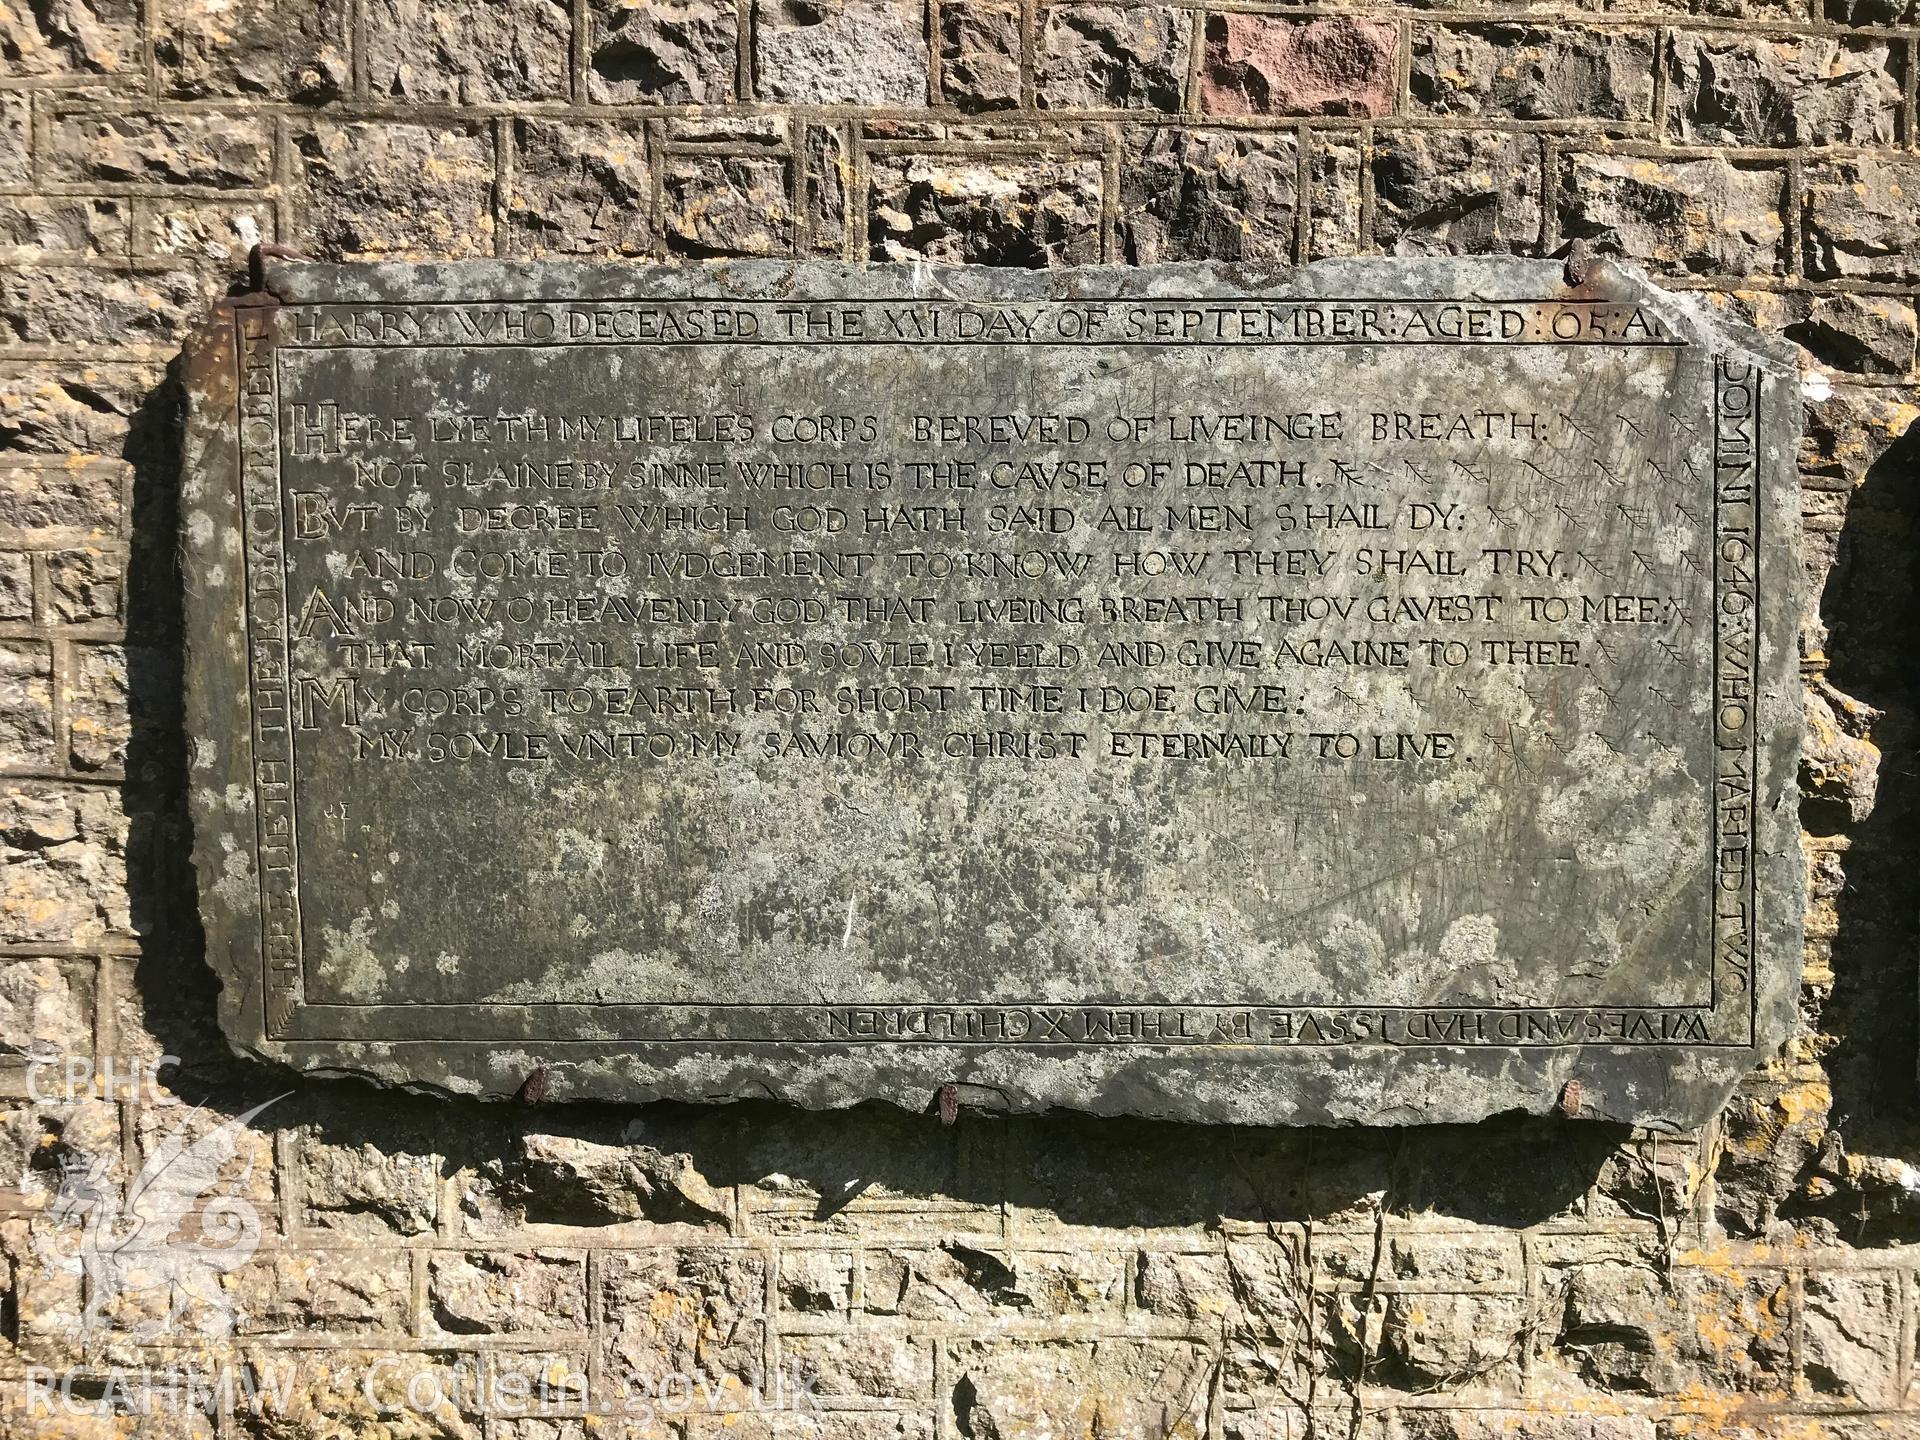 Digital colour photograph showing detailed view of memorial stone dated 1646 at St Rhidian and Illtyd's church, Llanrhidian, taken by Paul R. Davis on 5th May 2019.